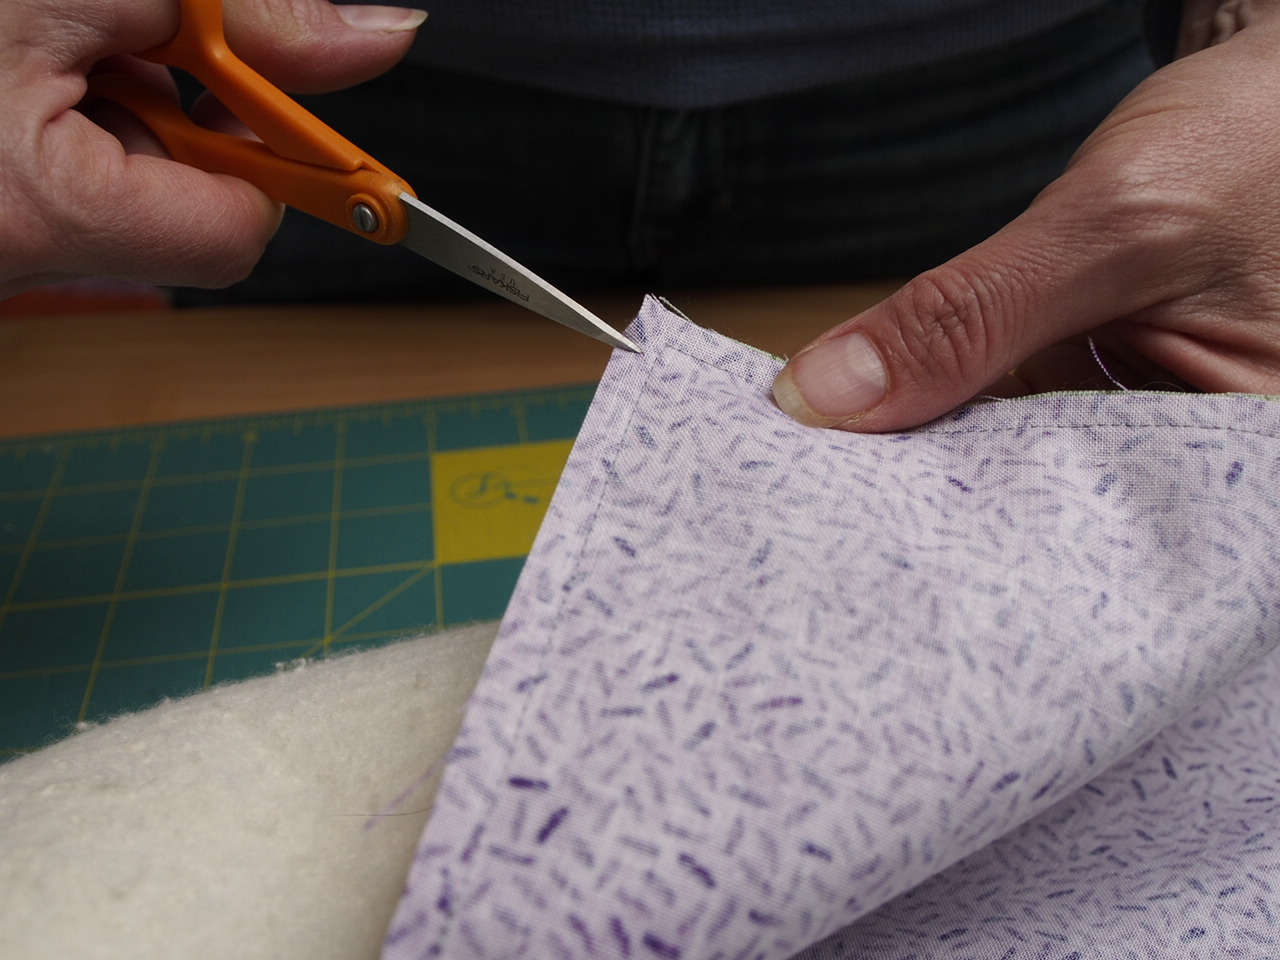 How to Bind a Quilt - no hand sewing required!